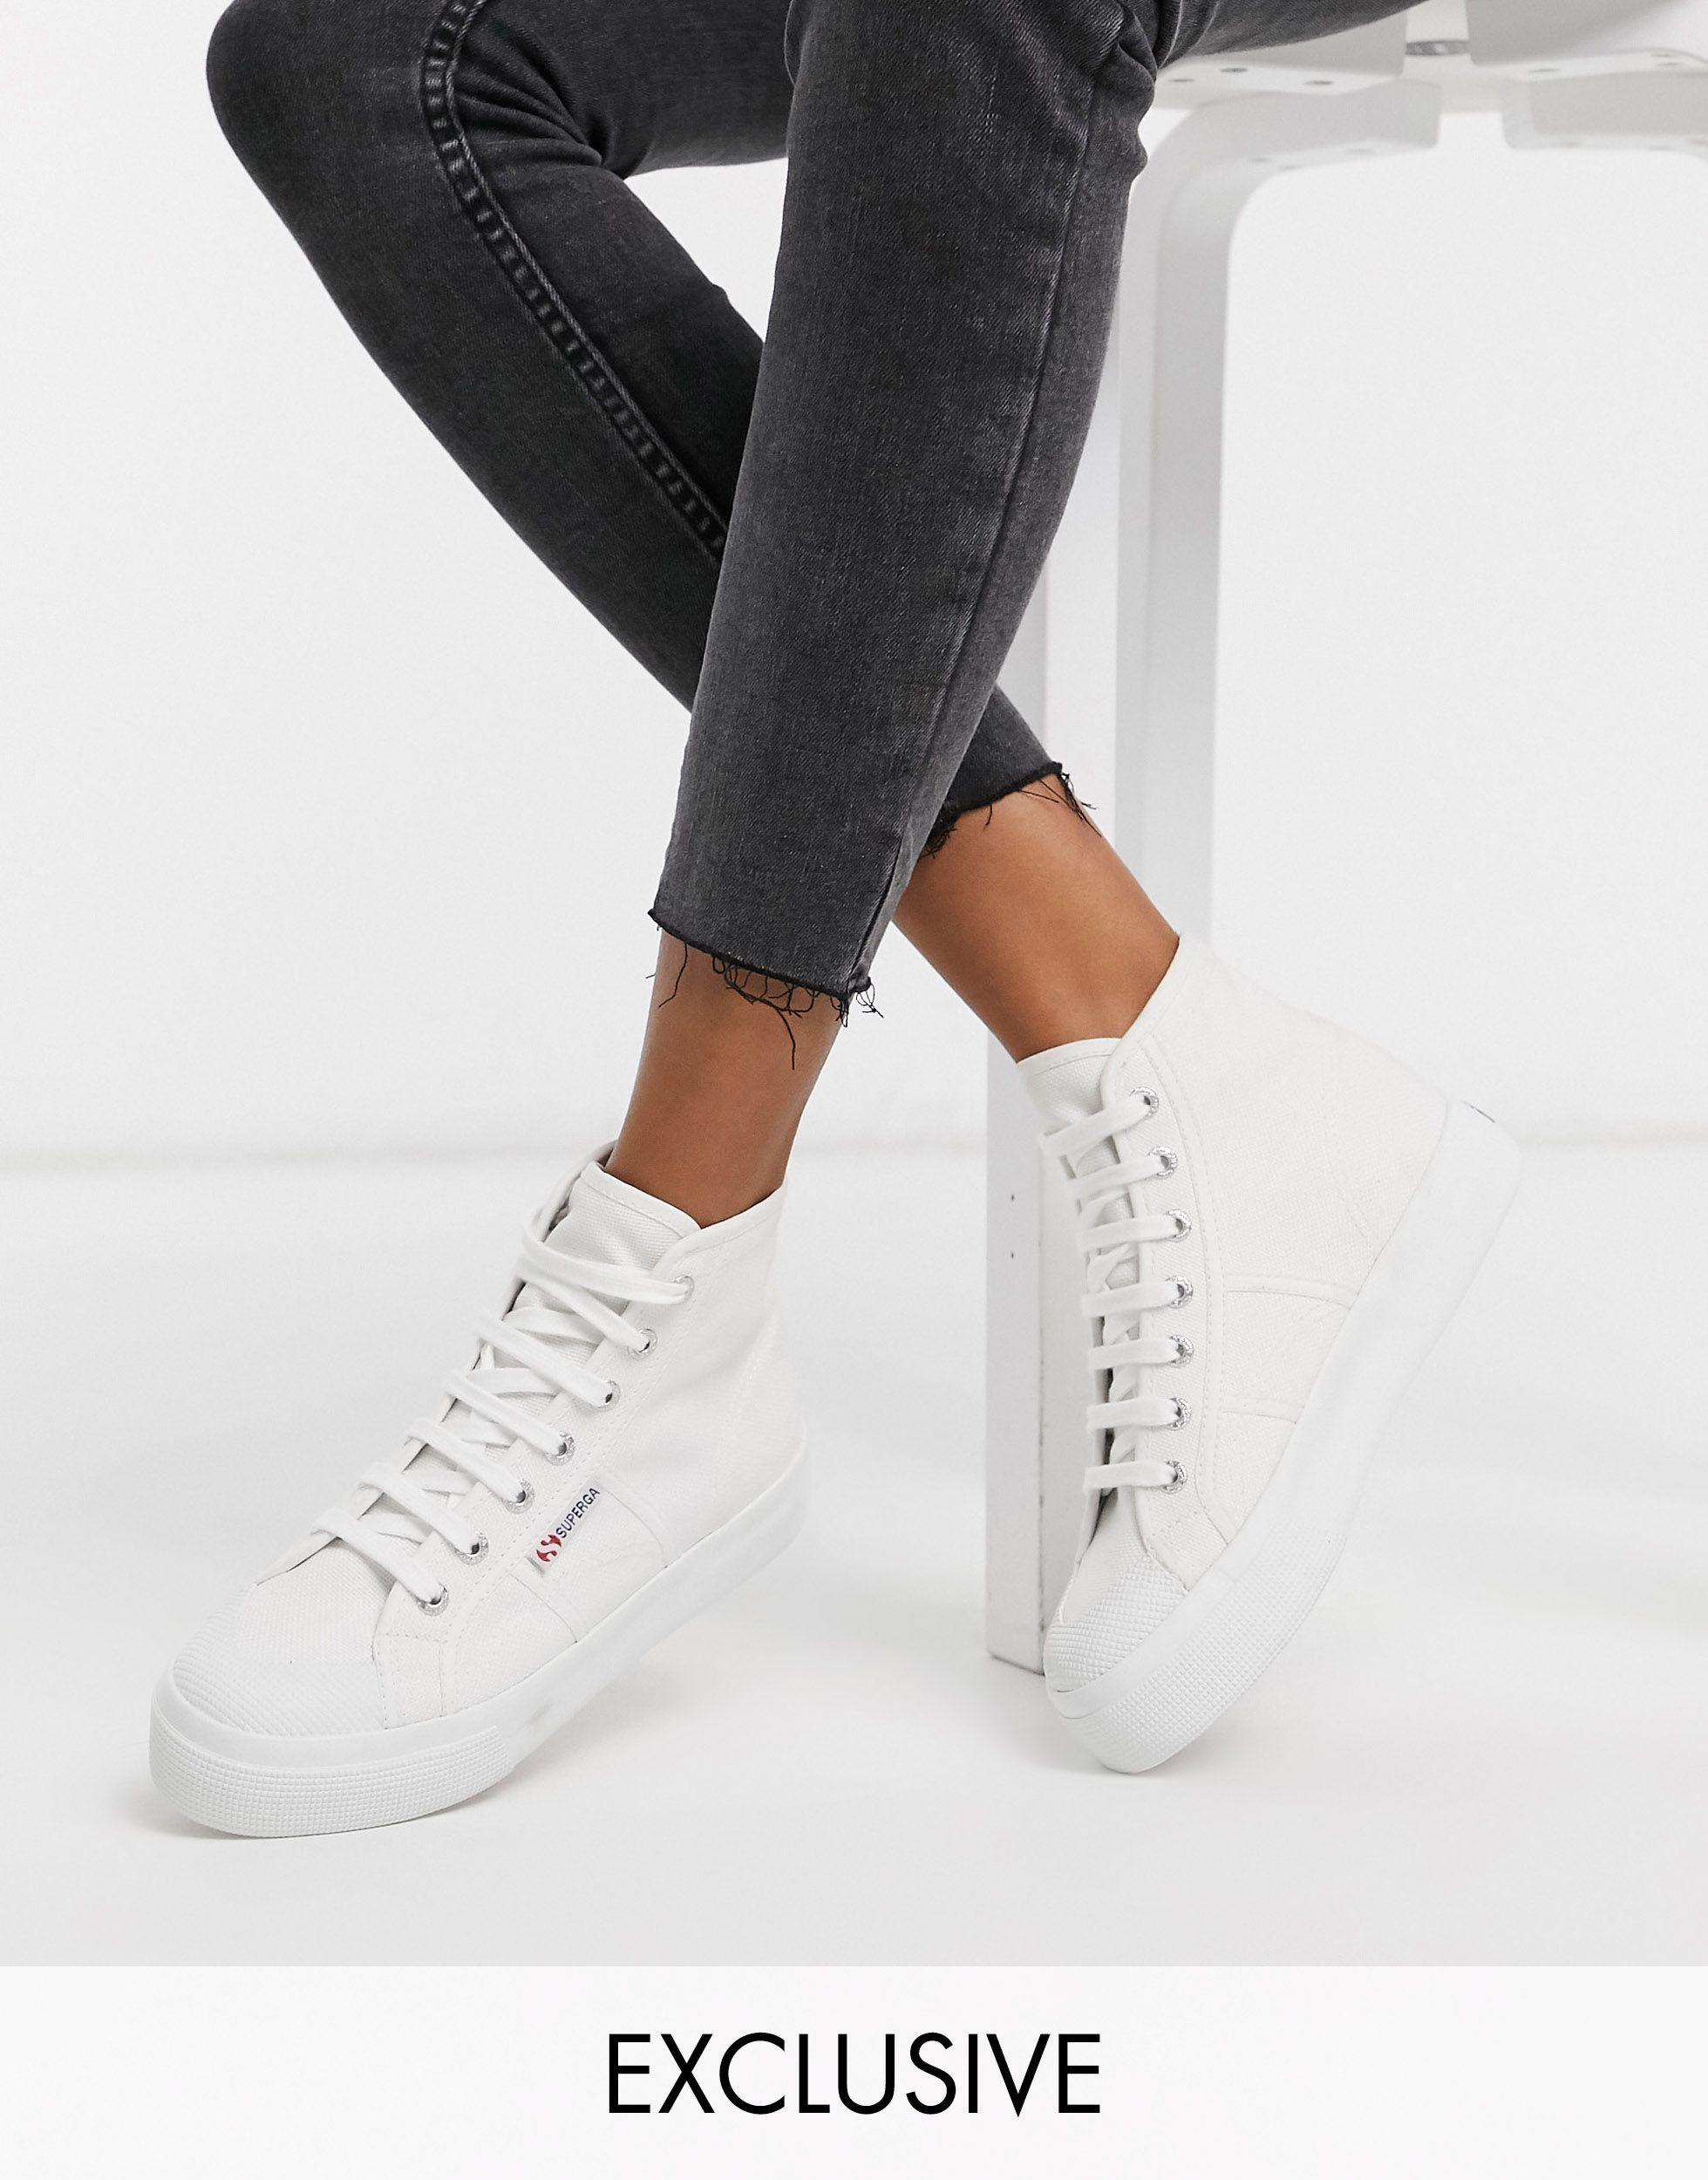 Superga – 2295 – exklusive, hohe sneaker mit flacher plateausohle in Weiß |  Lyst AT